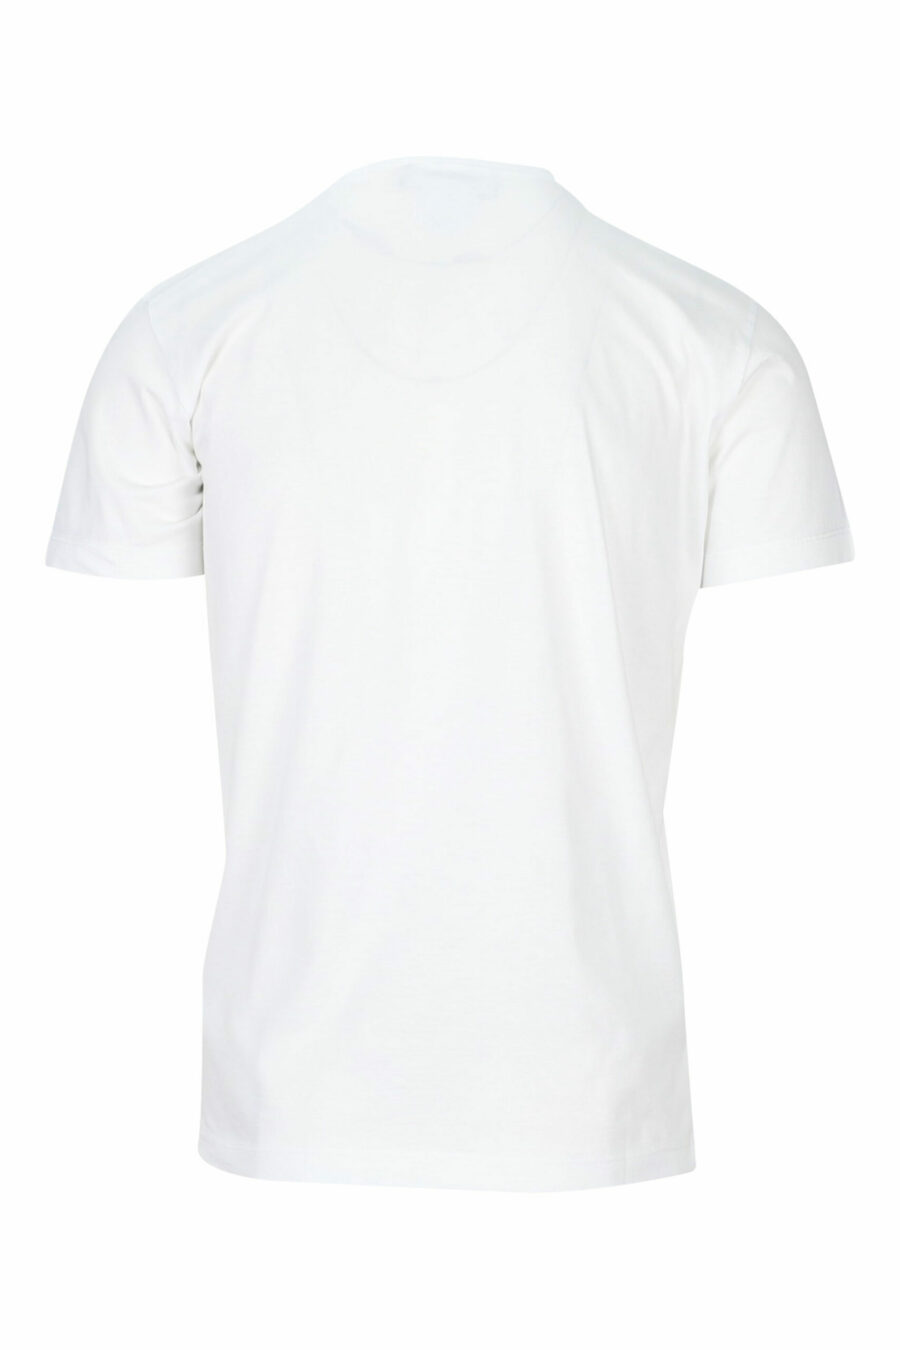 White T-shirt with white and blue maxilogo with shield - 8054148159665 1 scaled